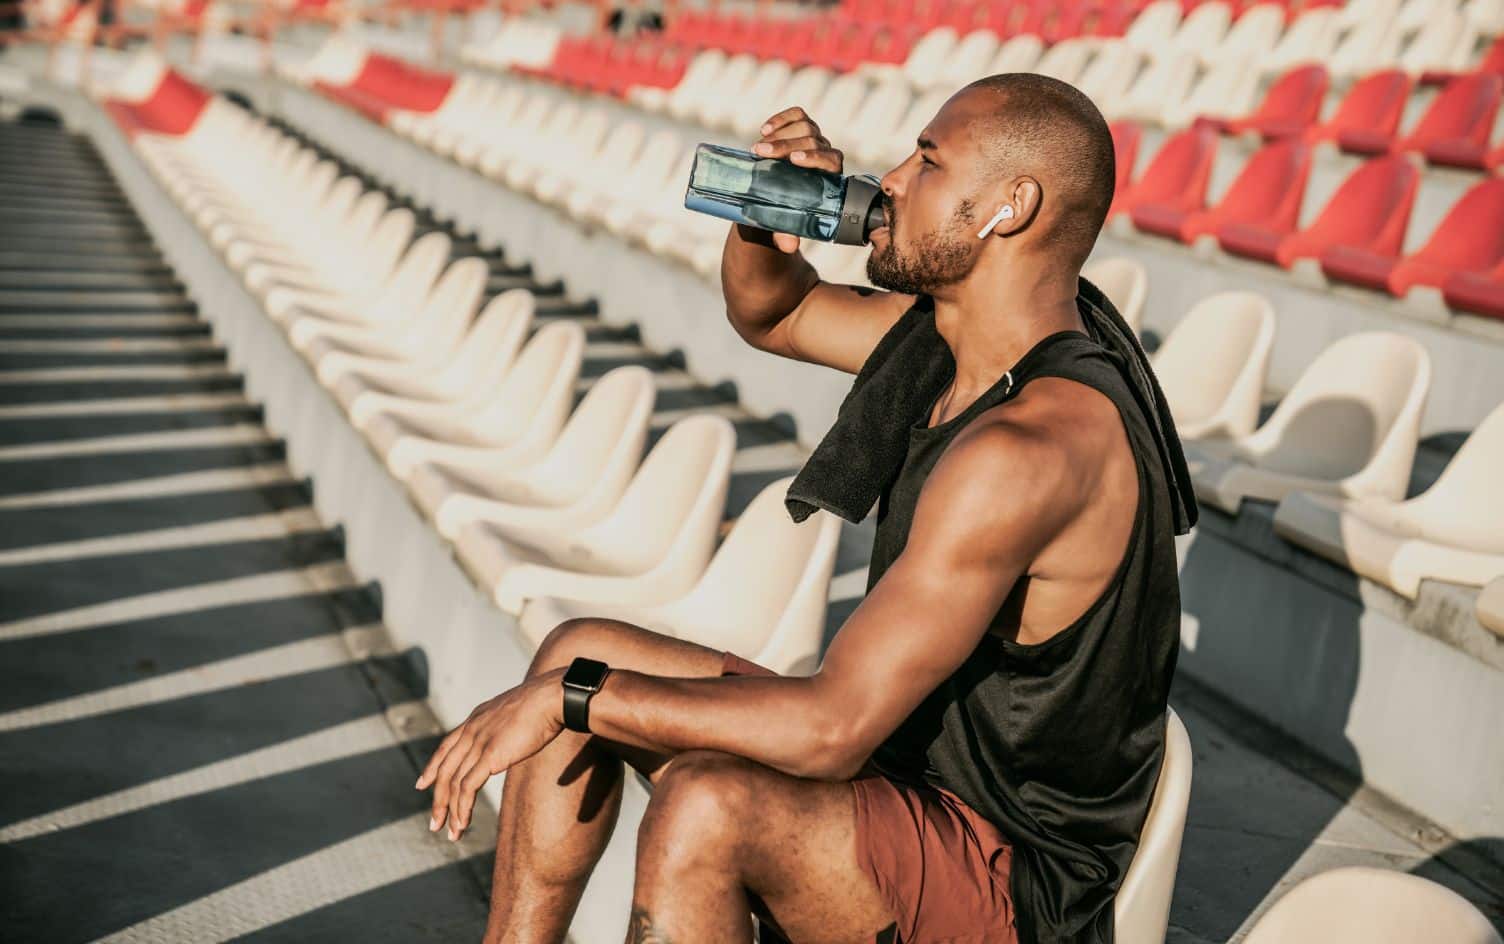 Athlete's Guide to Avoiding Bloating, Cramping and Gastric Distress